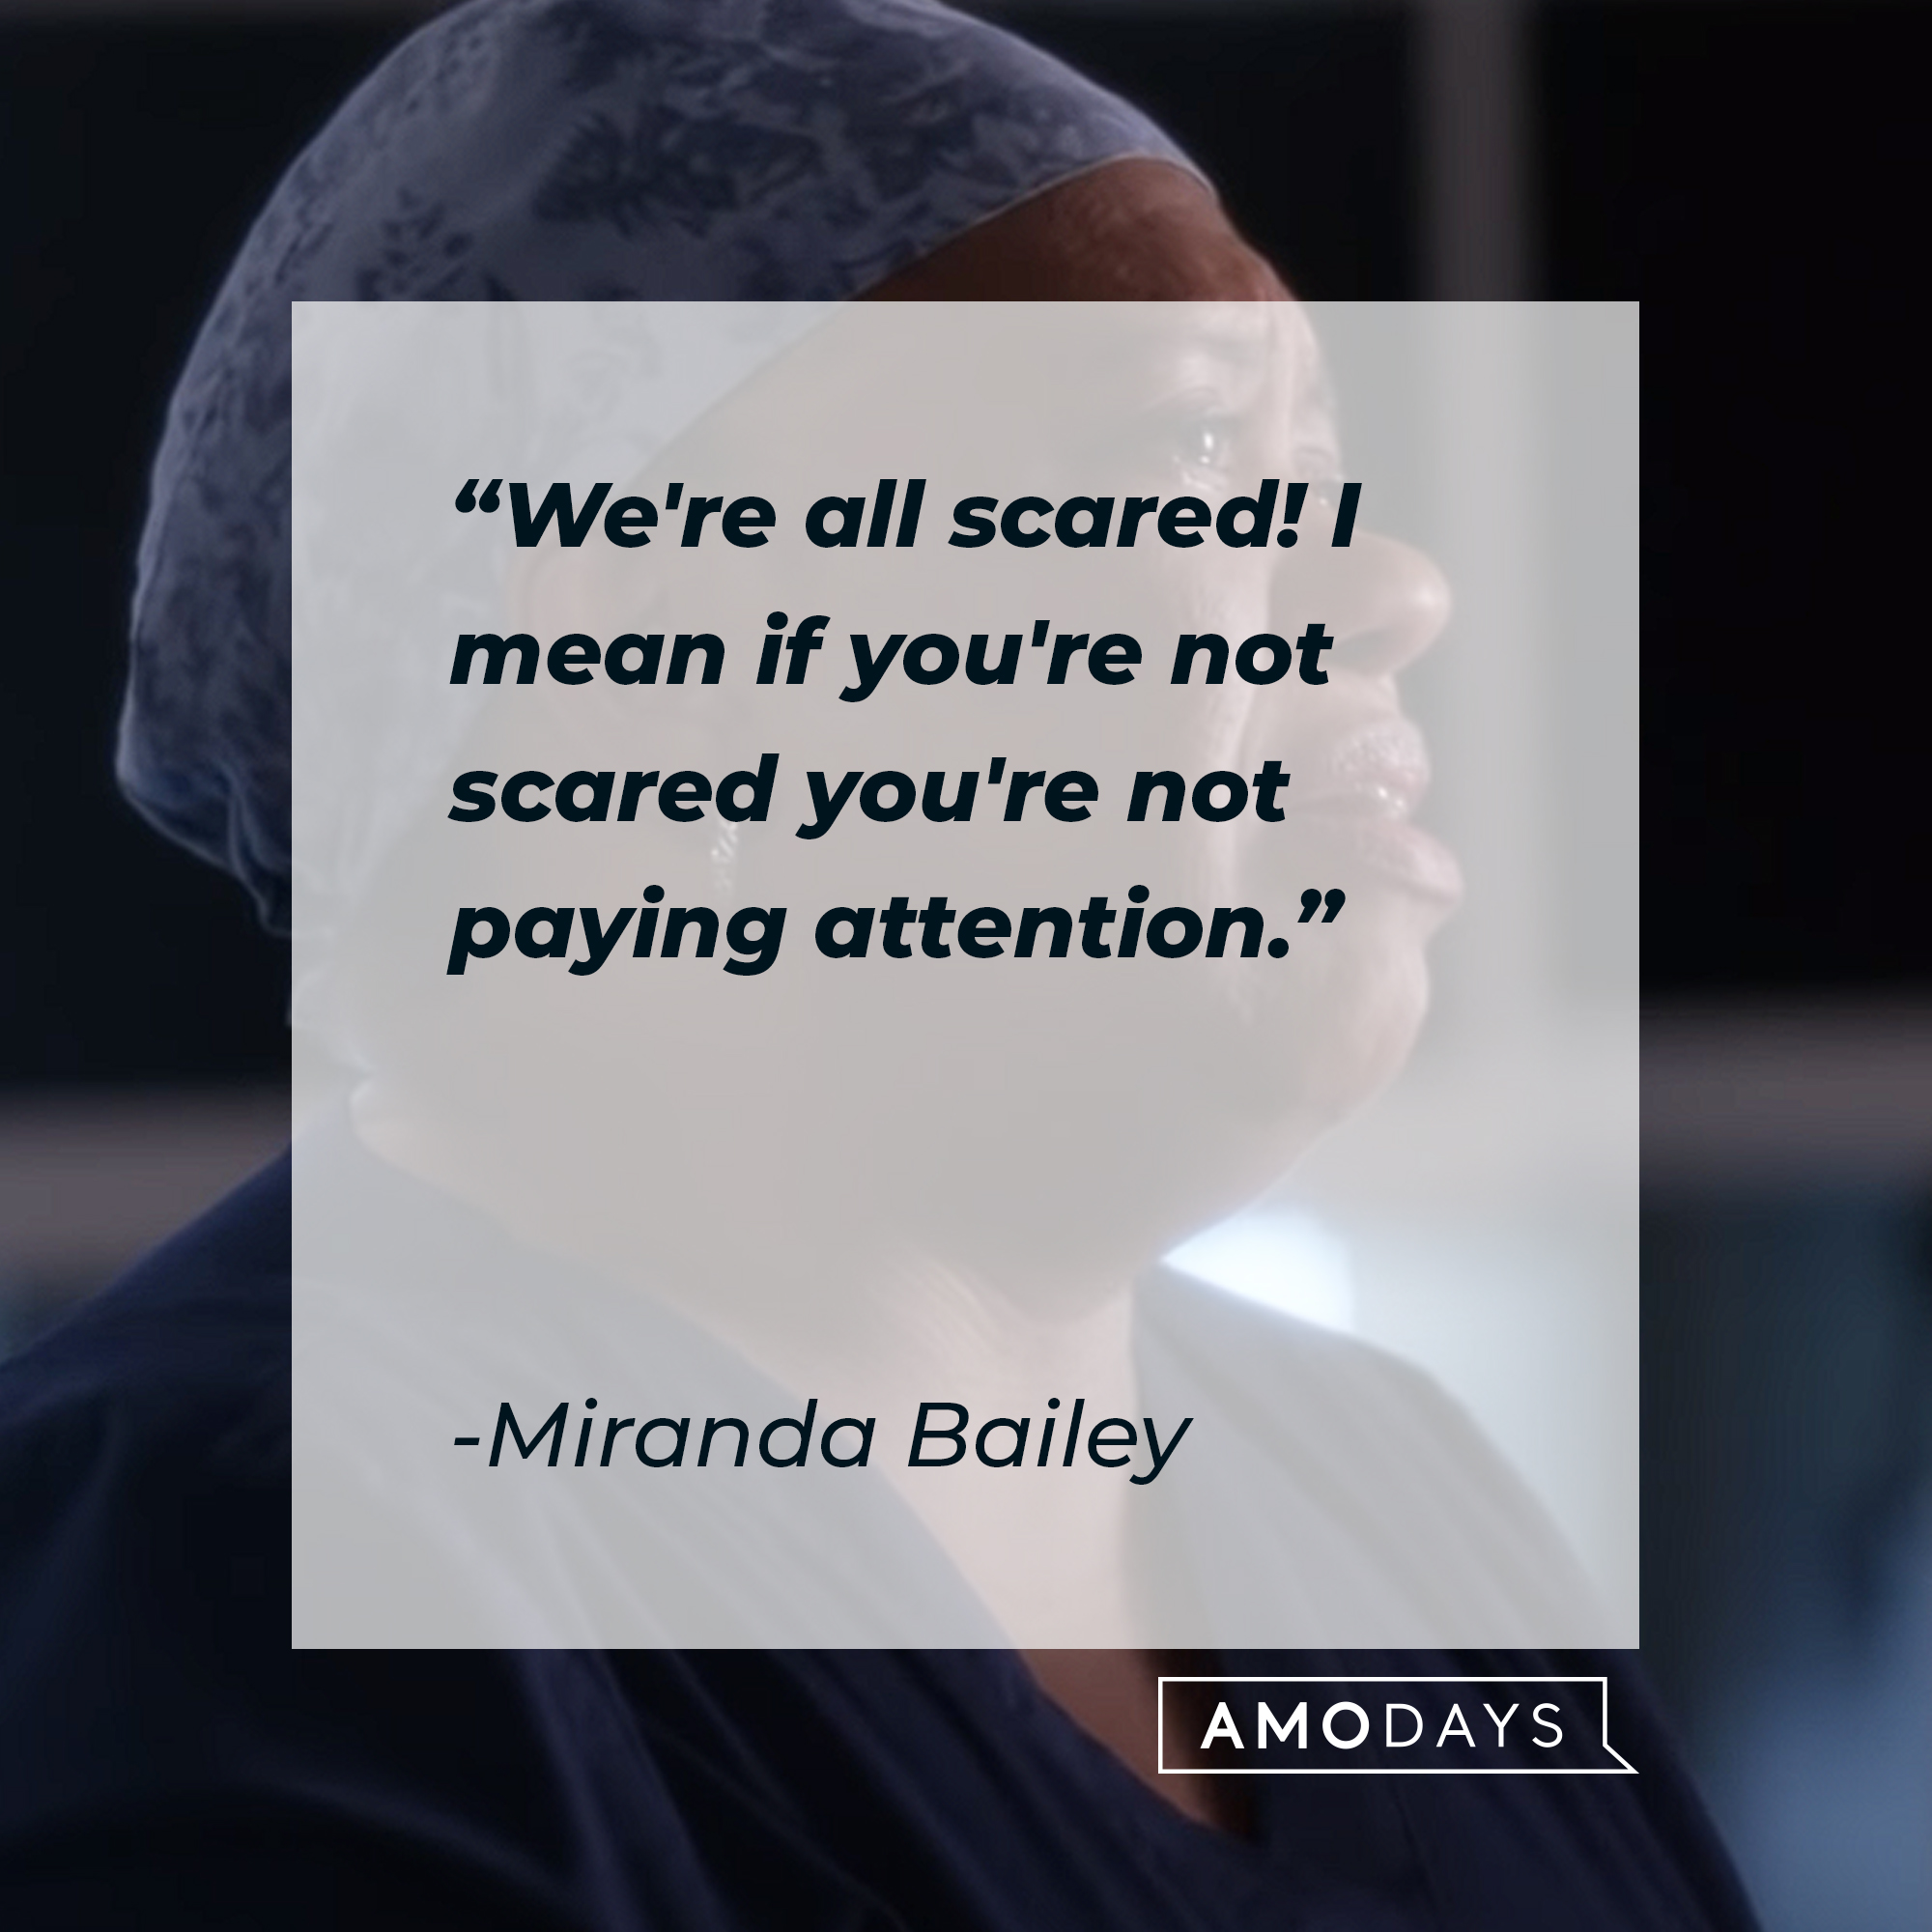 Miranda Bailey's quote: "We're all scared! I mean if you're not scared you're not paying attention." | Source: youtube.com/ABCNetwork